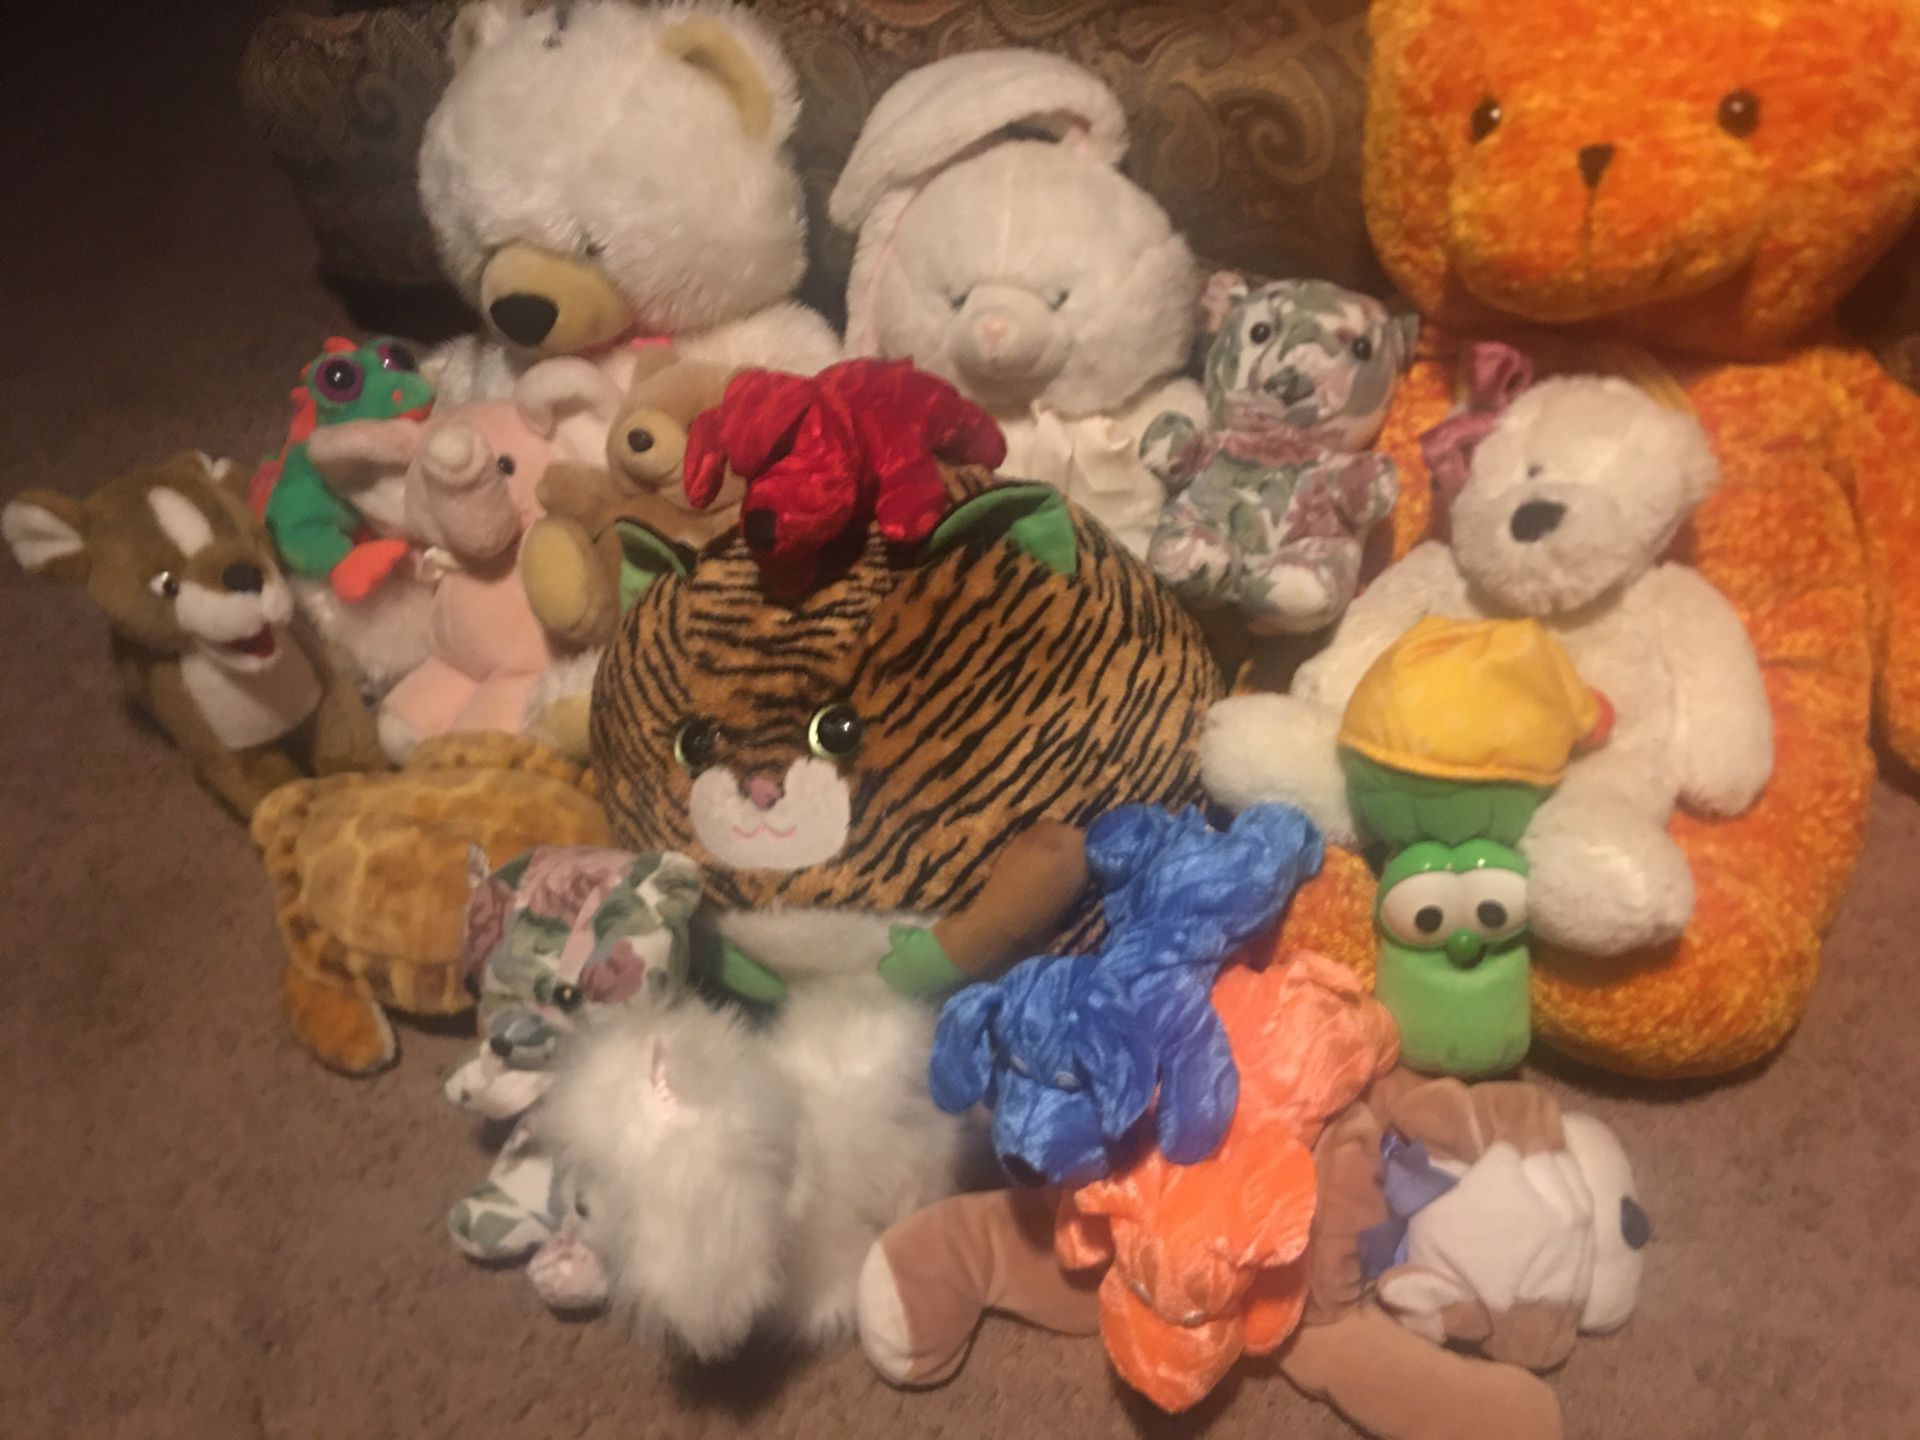 Stuffed animals for free